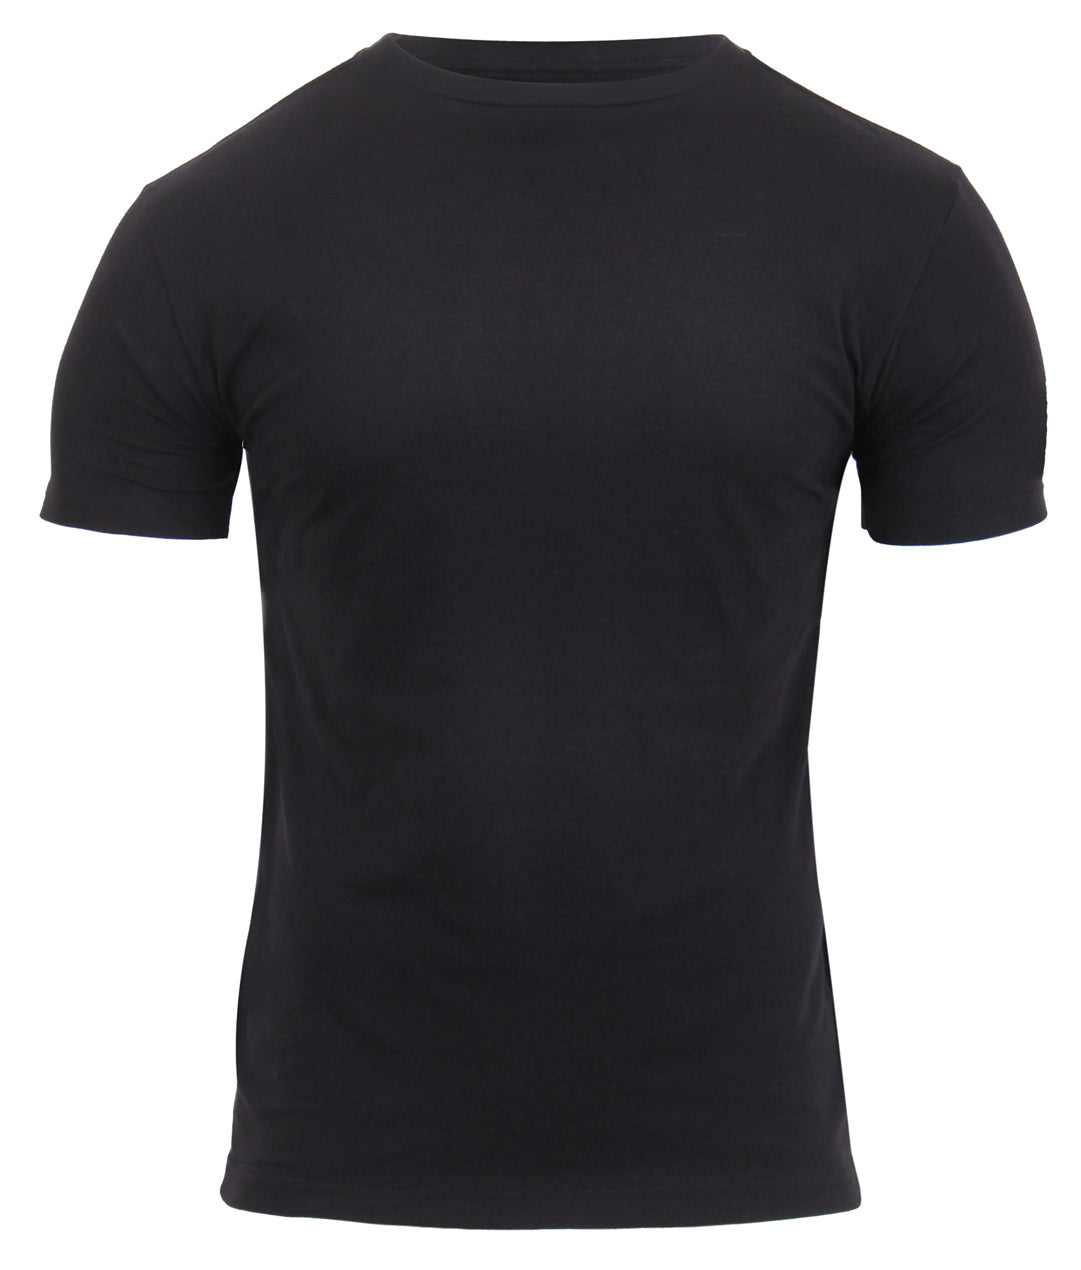 [AR 670-1] Poly/Cotton Athletic Fit T-Shirts Black